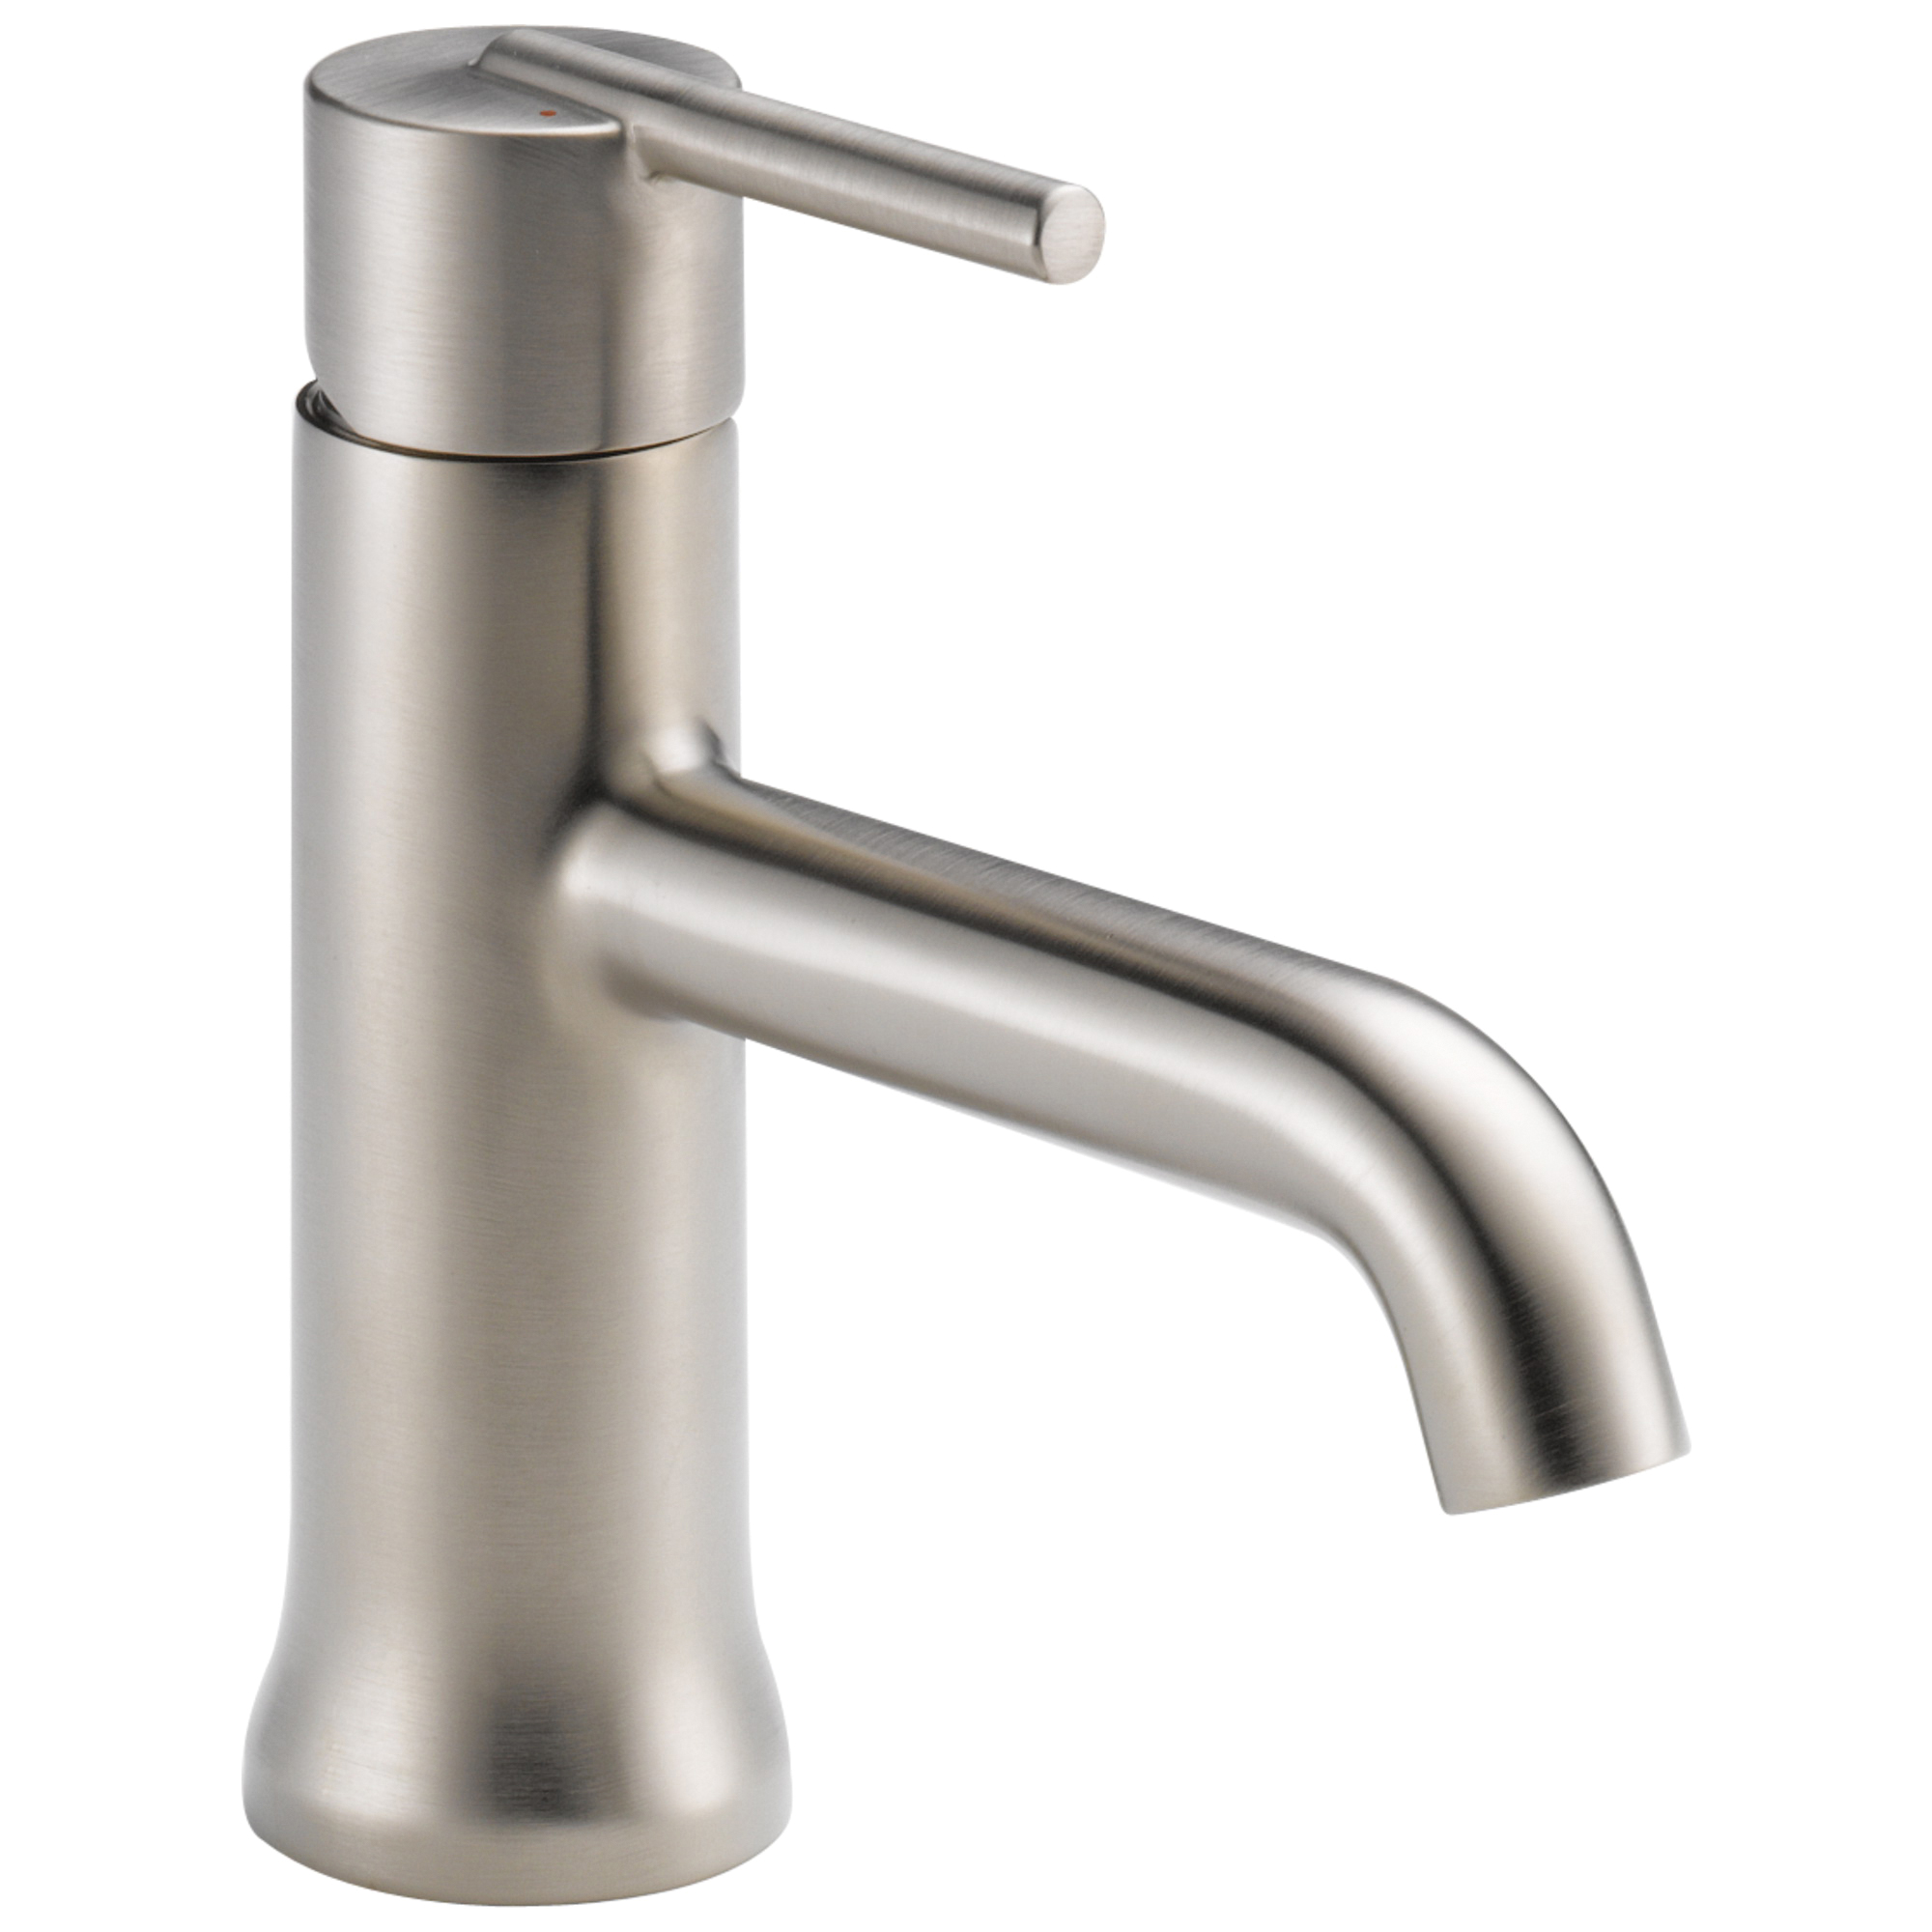 559LF-SSTP Tract-Pack™ Lavatory Faucet, Trinsic®, Stainless Steel, 1 Handles, 50/50 Pop-Up Drain, 1.2 gpm - Discontinued